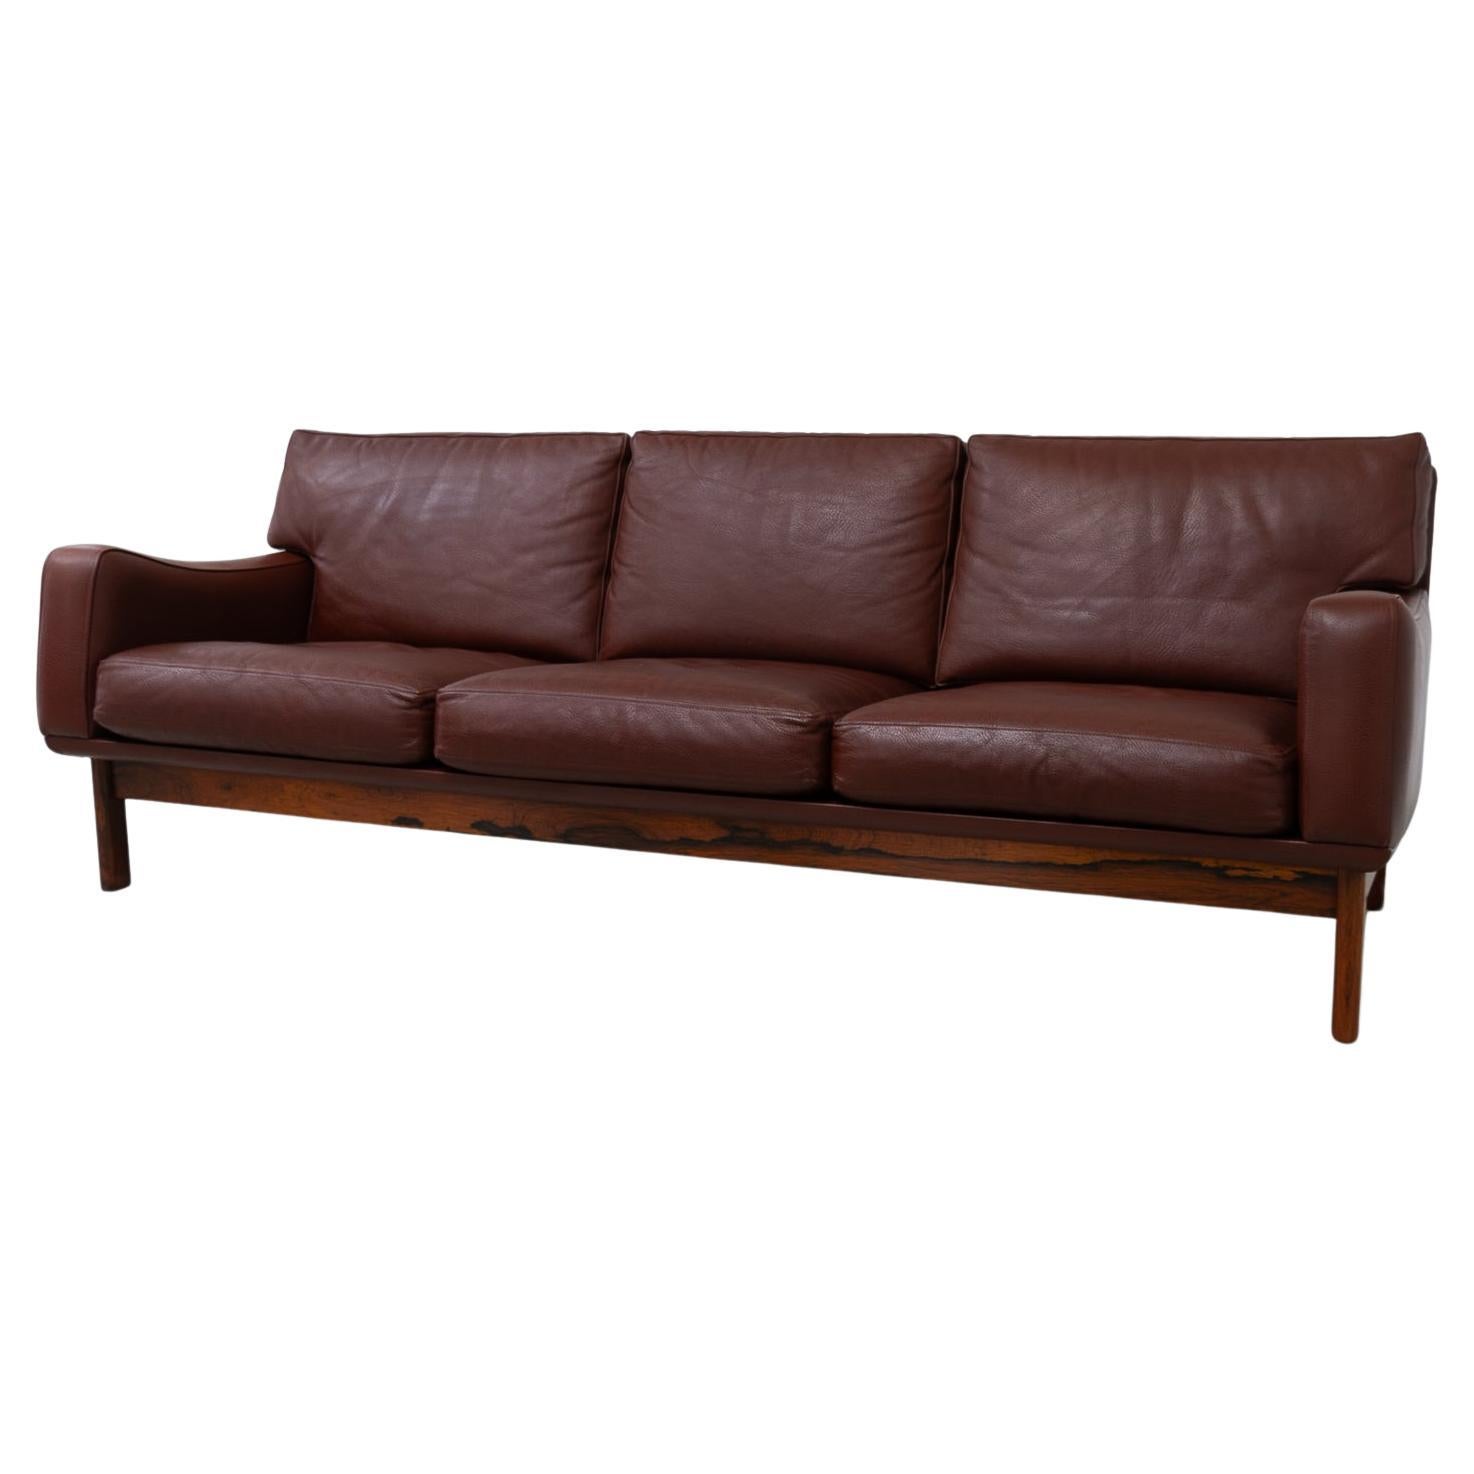 Danish Modern Leather and Rosewood Sofa by Eran, 1960s. For Sale